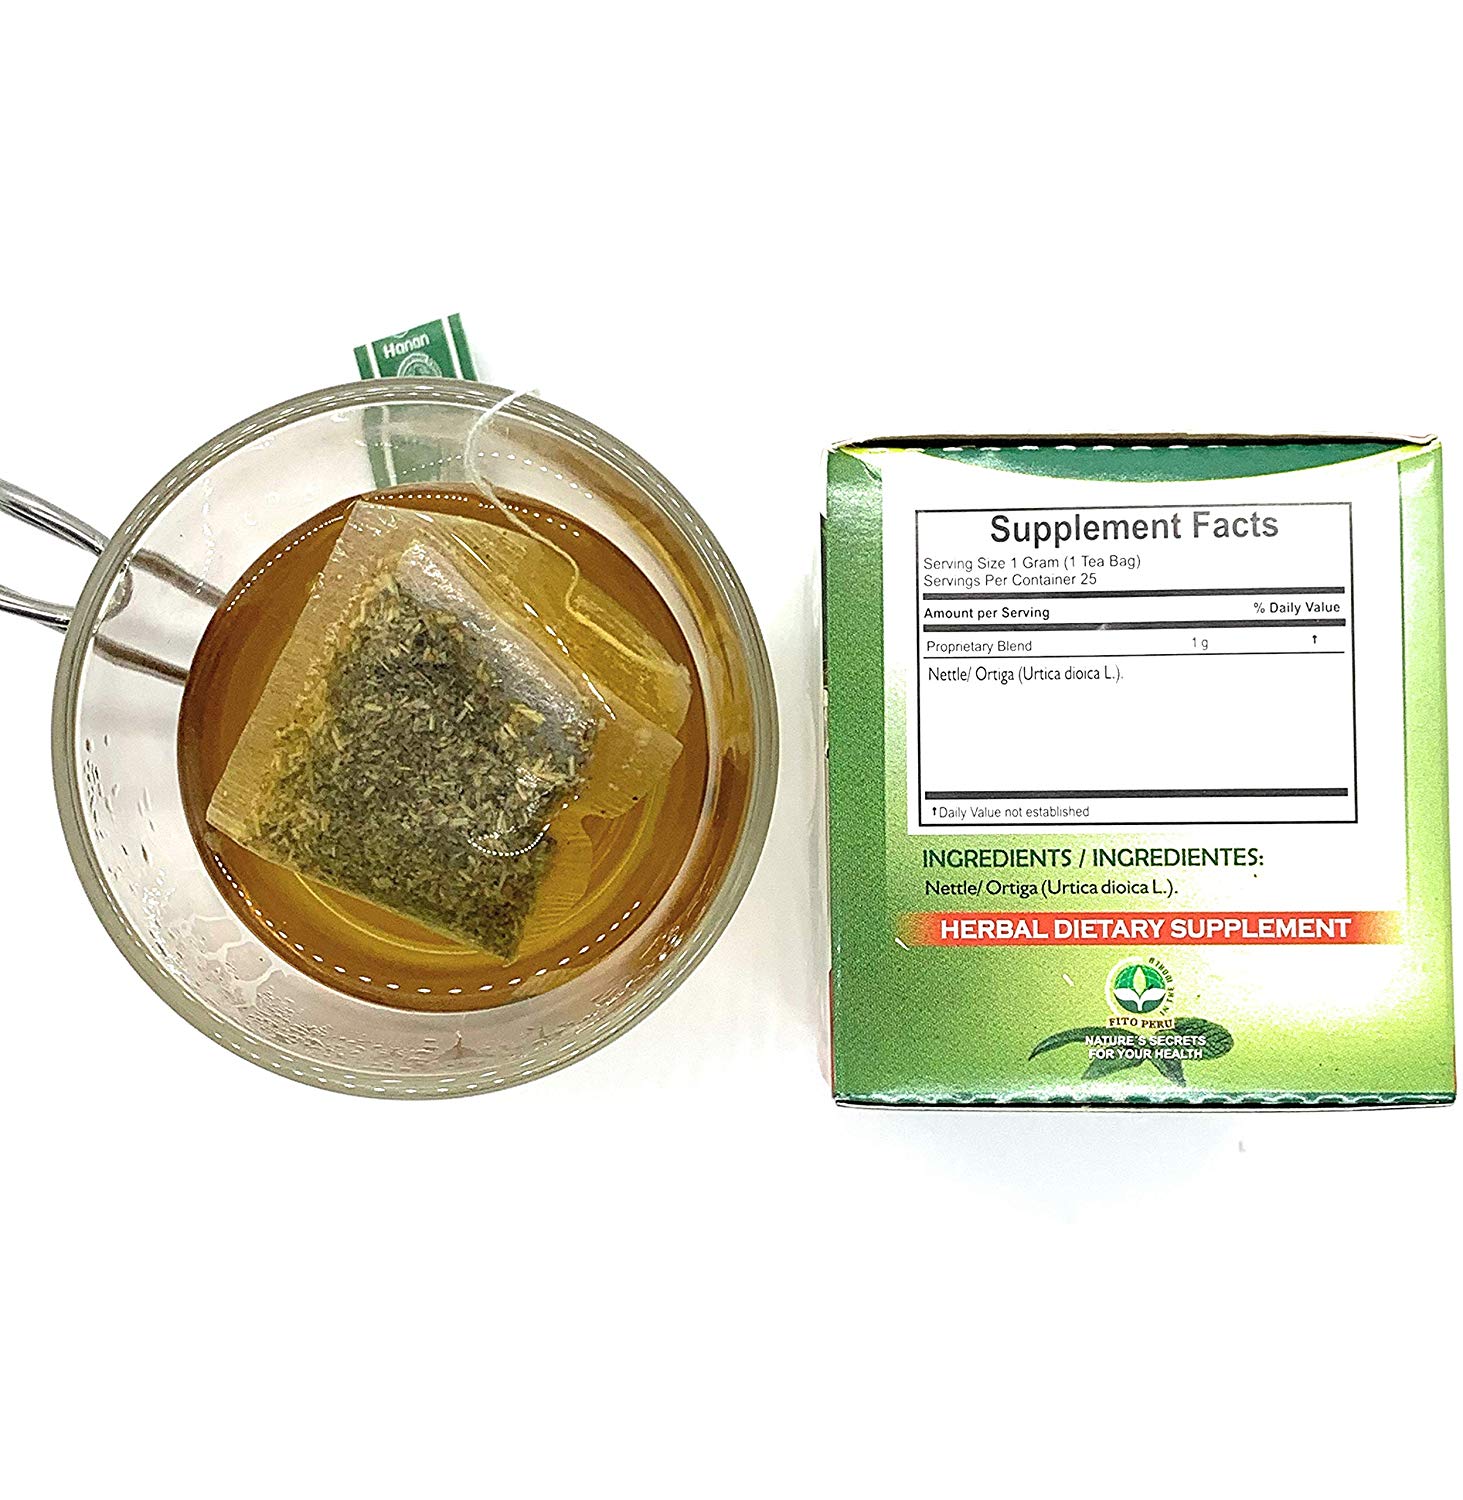 Nettle Leaf | Herbal Tea 100% Natural. Support a Healthy Urinary Tract and Naturally Cleanse Prostate. ( 25 Tea Bags)